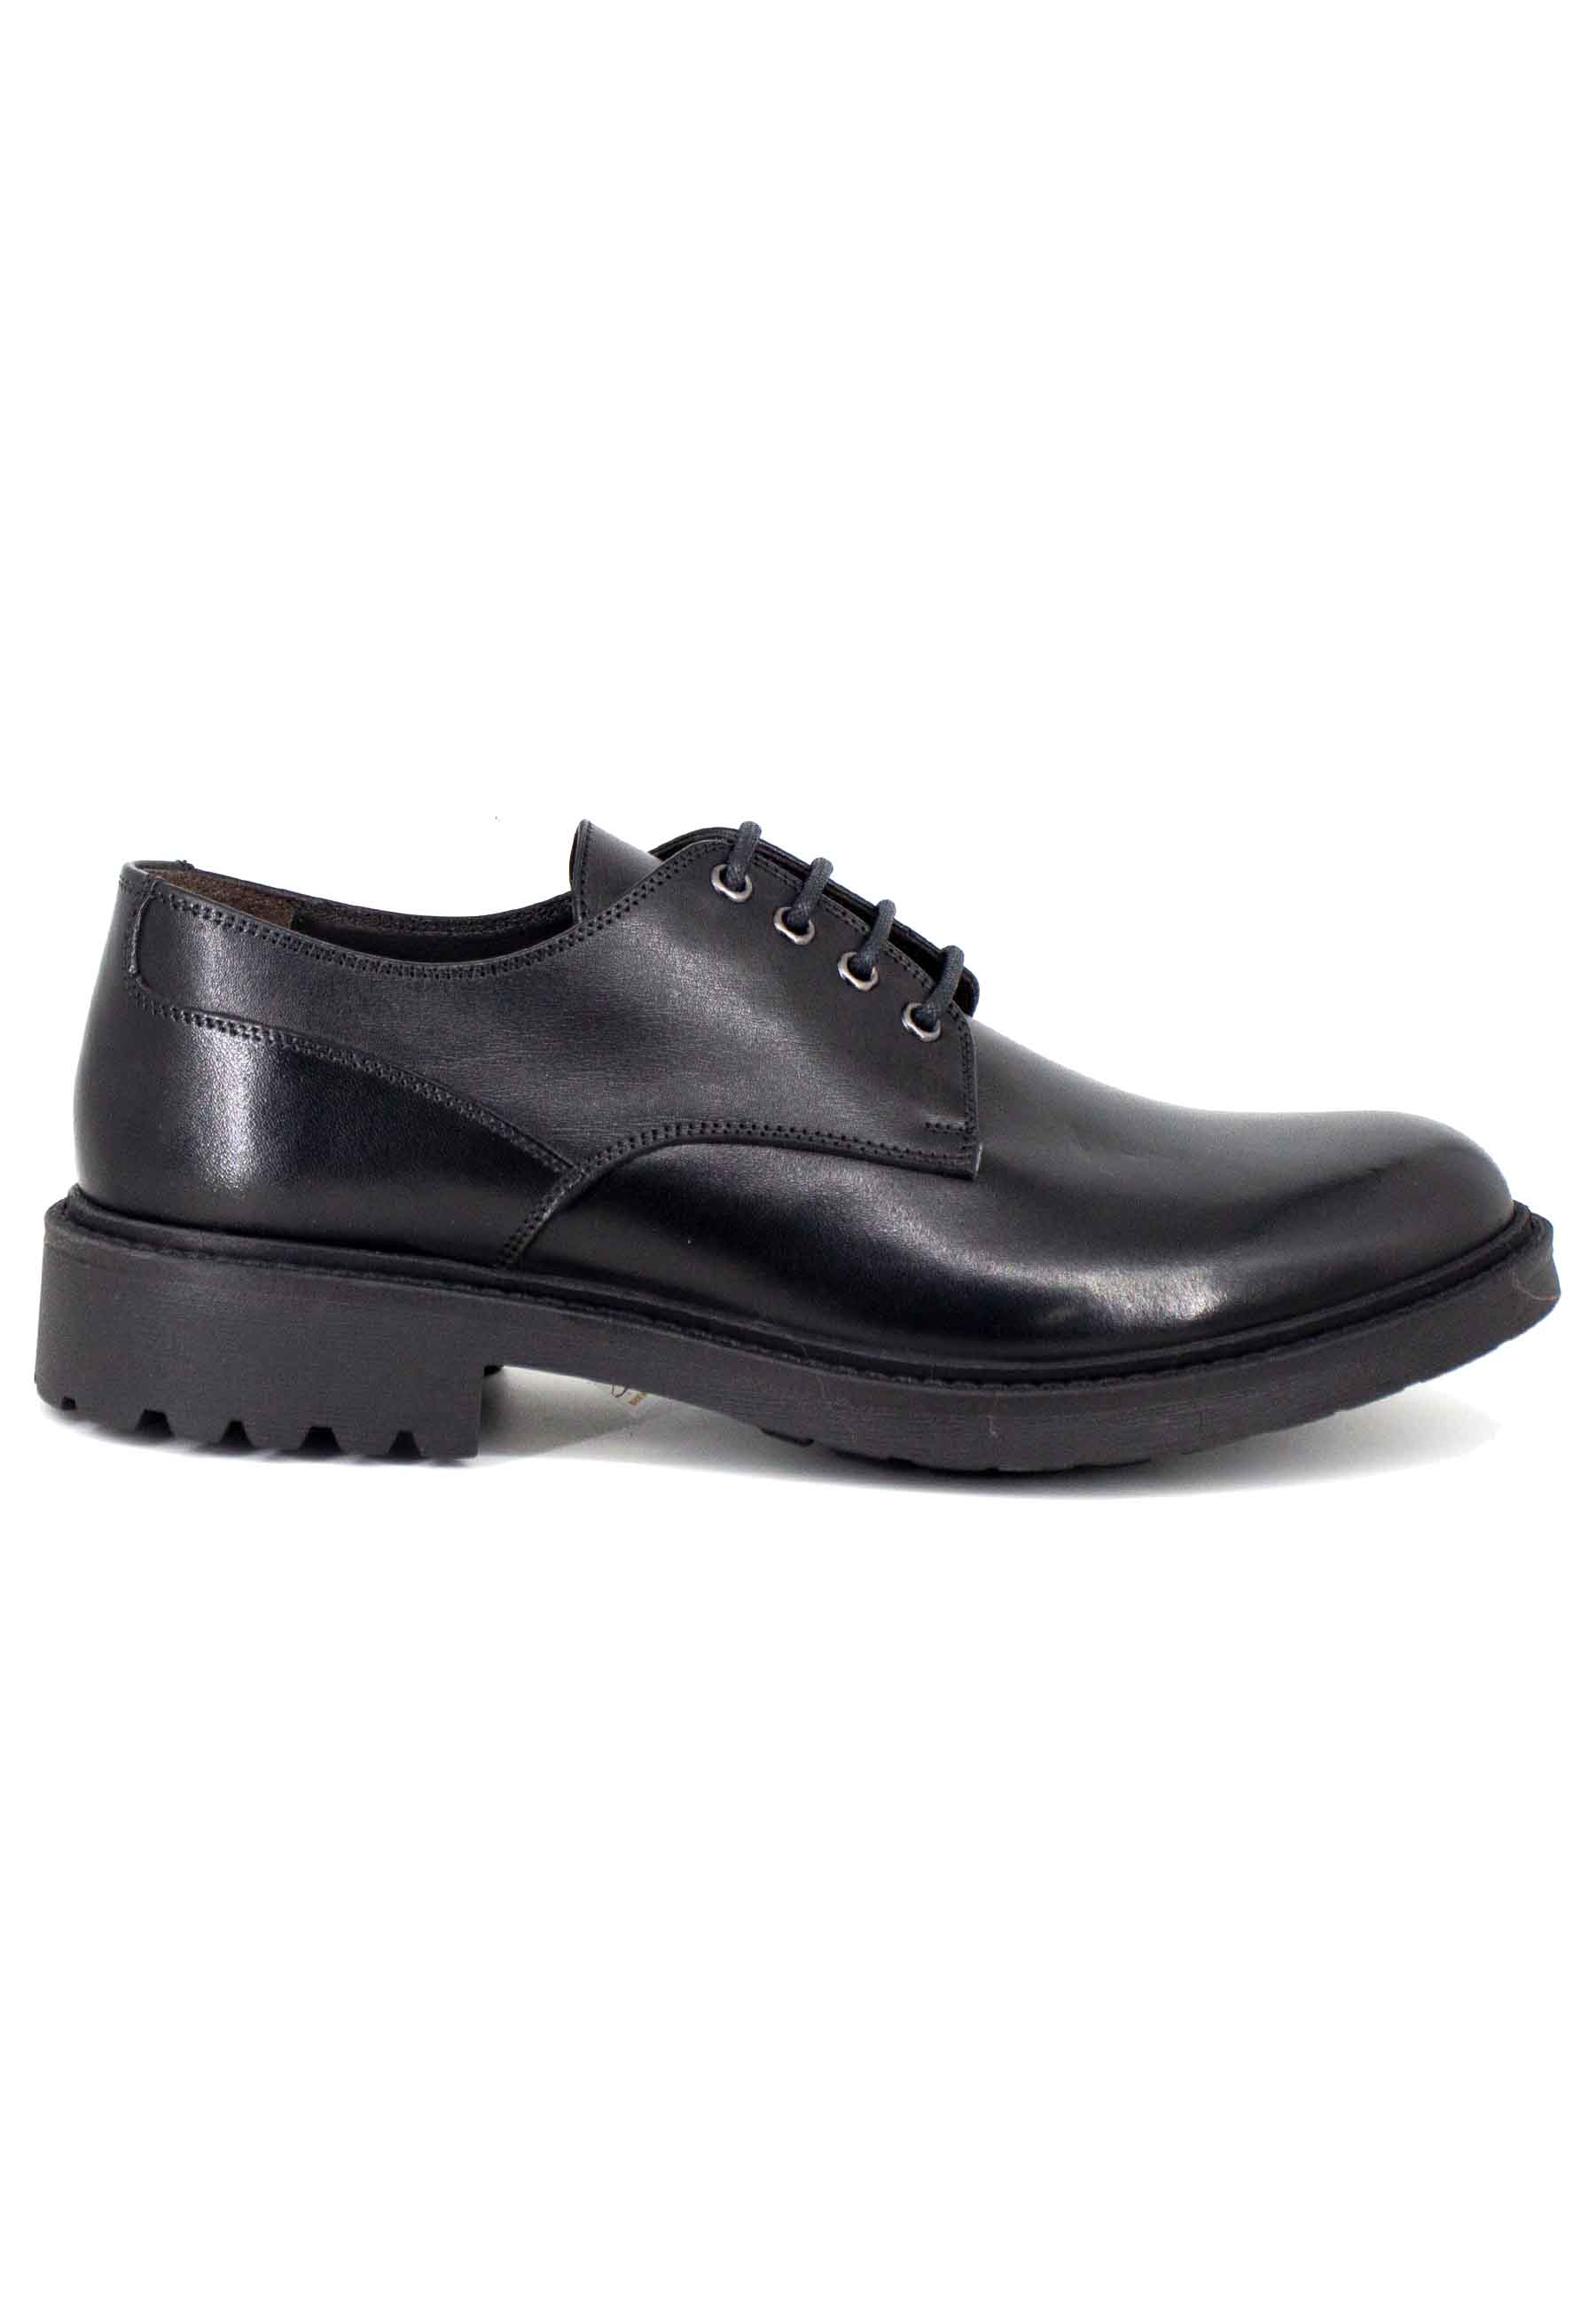 Men's opaque black leather lace-ups with rubber sole